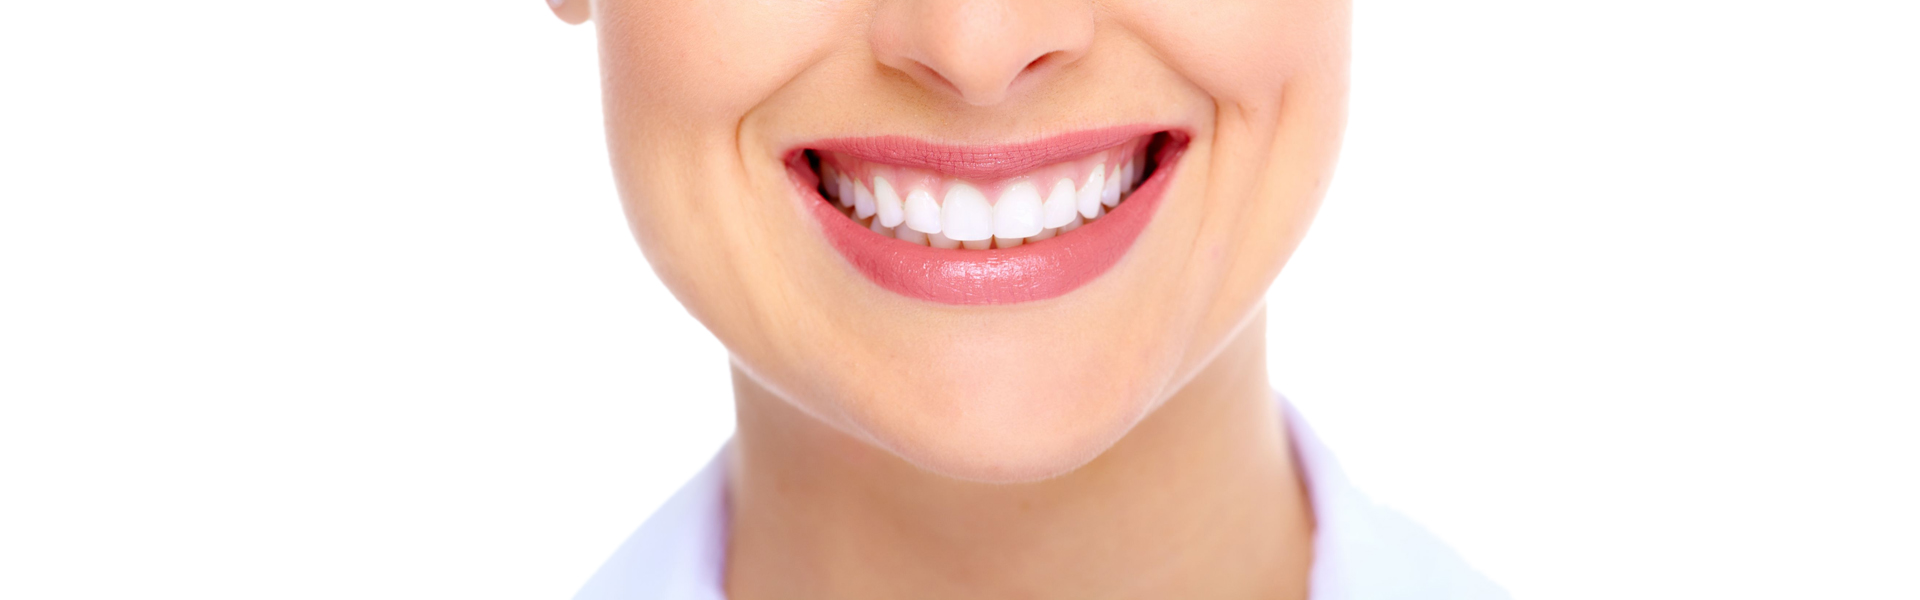 Dental Crowns: What Are The Different Types?